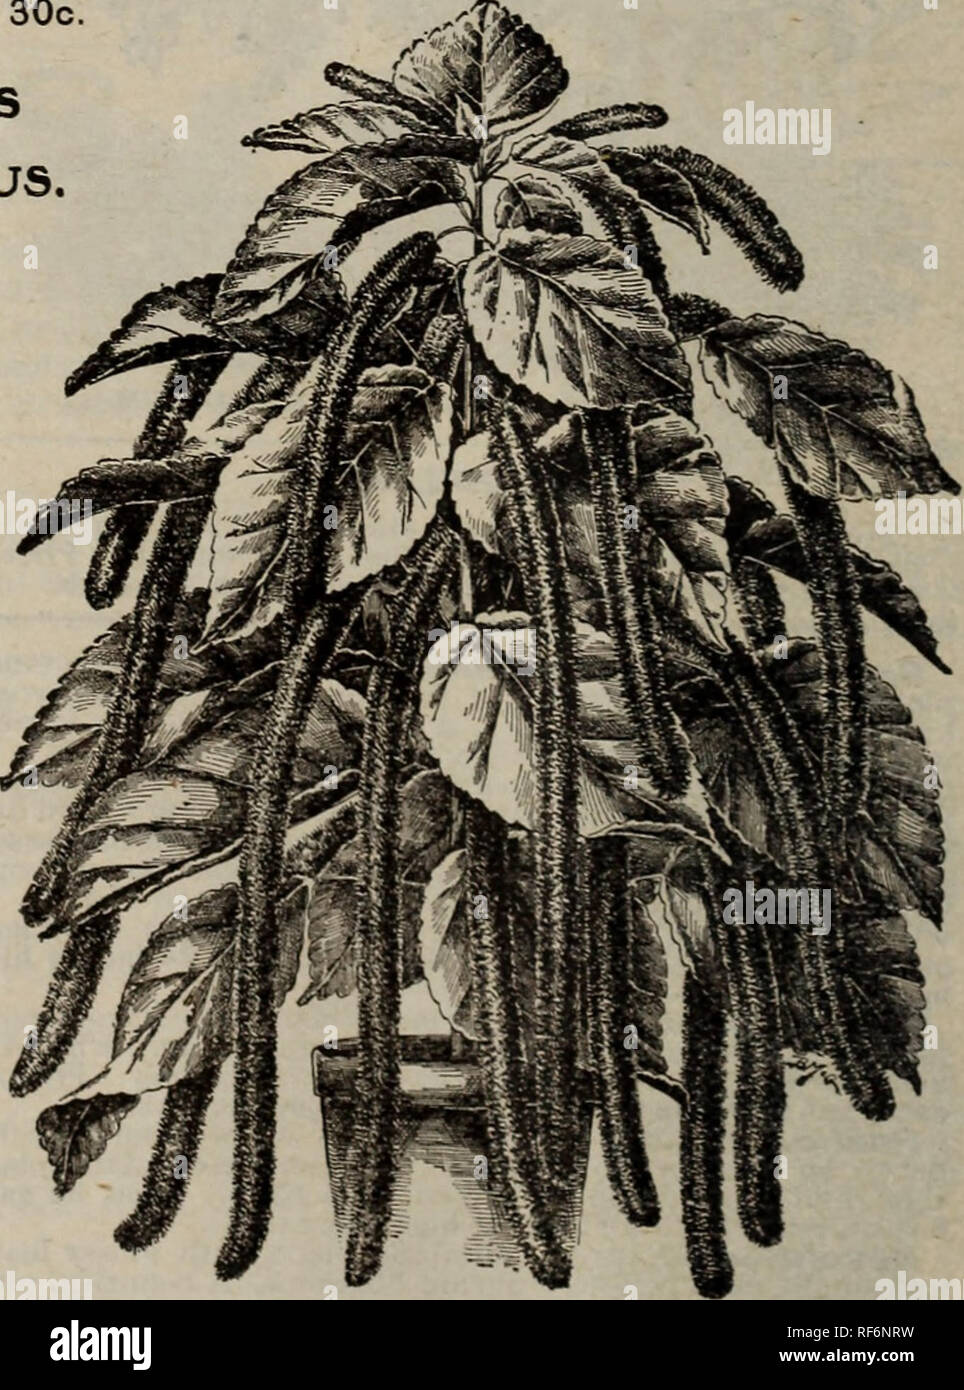 . The Geo. H. Mellen Co. : 1902. Nursery stock Ohio Springfield Catalogs; Bulbs (Plants) Catalogs; Flowers Seeds Catalogs; Plants, Ornamental Catalogs; Vegetables Seeds Catalogs; Fruit Catalogs. ACALTPHA MARGTNATA ACALYPHA MARGINATA. Dark bronze, with rose margined foliage. This variety equals the showiest varieties of Coleus in effect and has besides a decided advantage over any Coleus, namely, to be hardier, and not liable to wilt in the hottest and dryest weather. 15c each; 2 for 25c. ASPARAGUS TE,NUISSIMUS We cannot too highly praise this beautiful plant. If so desired, it can be grown hke Stock Photo